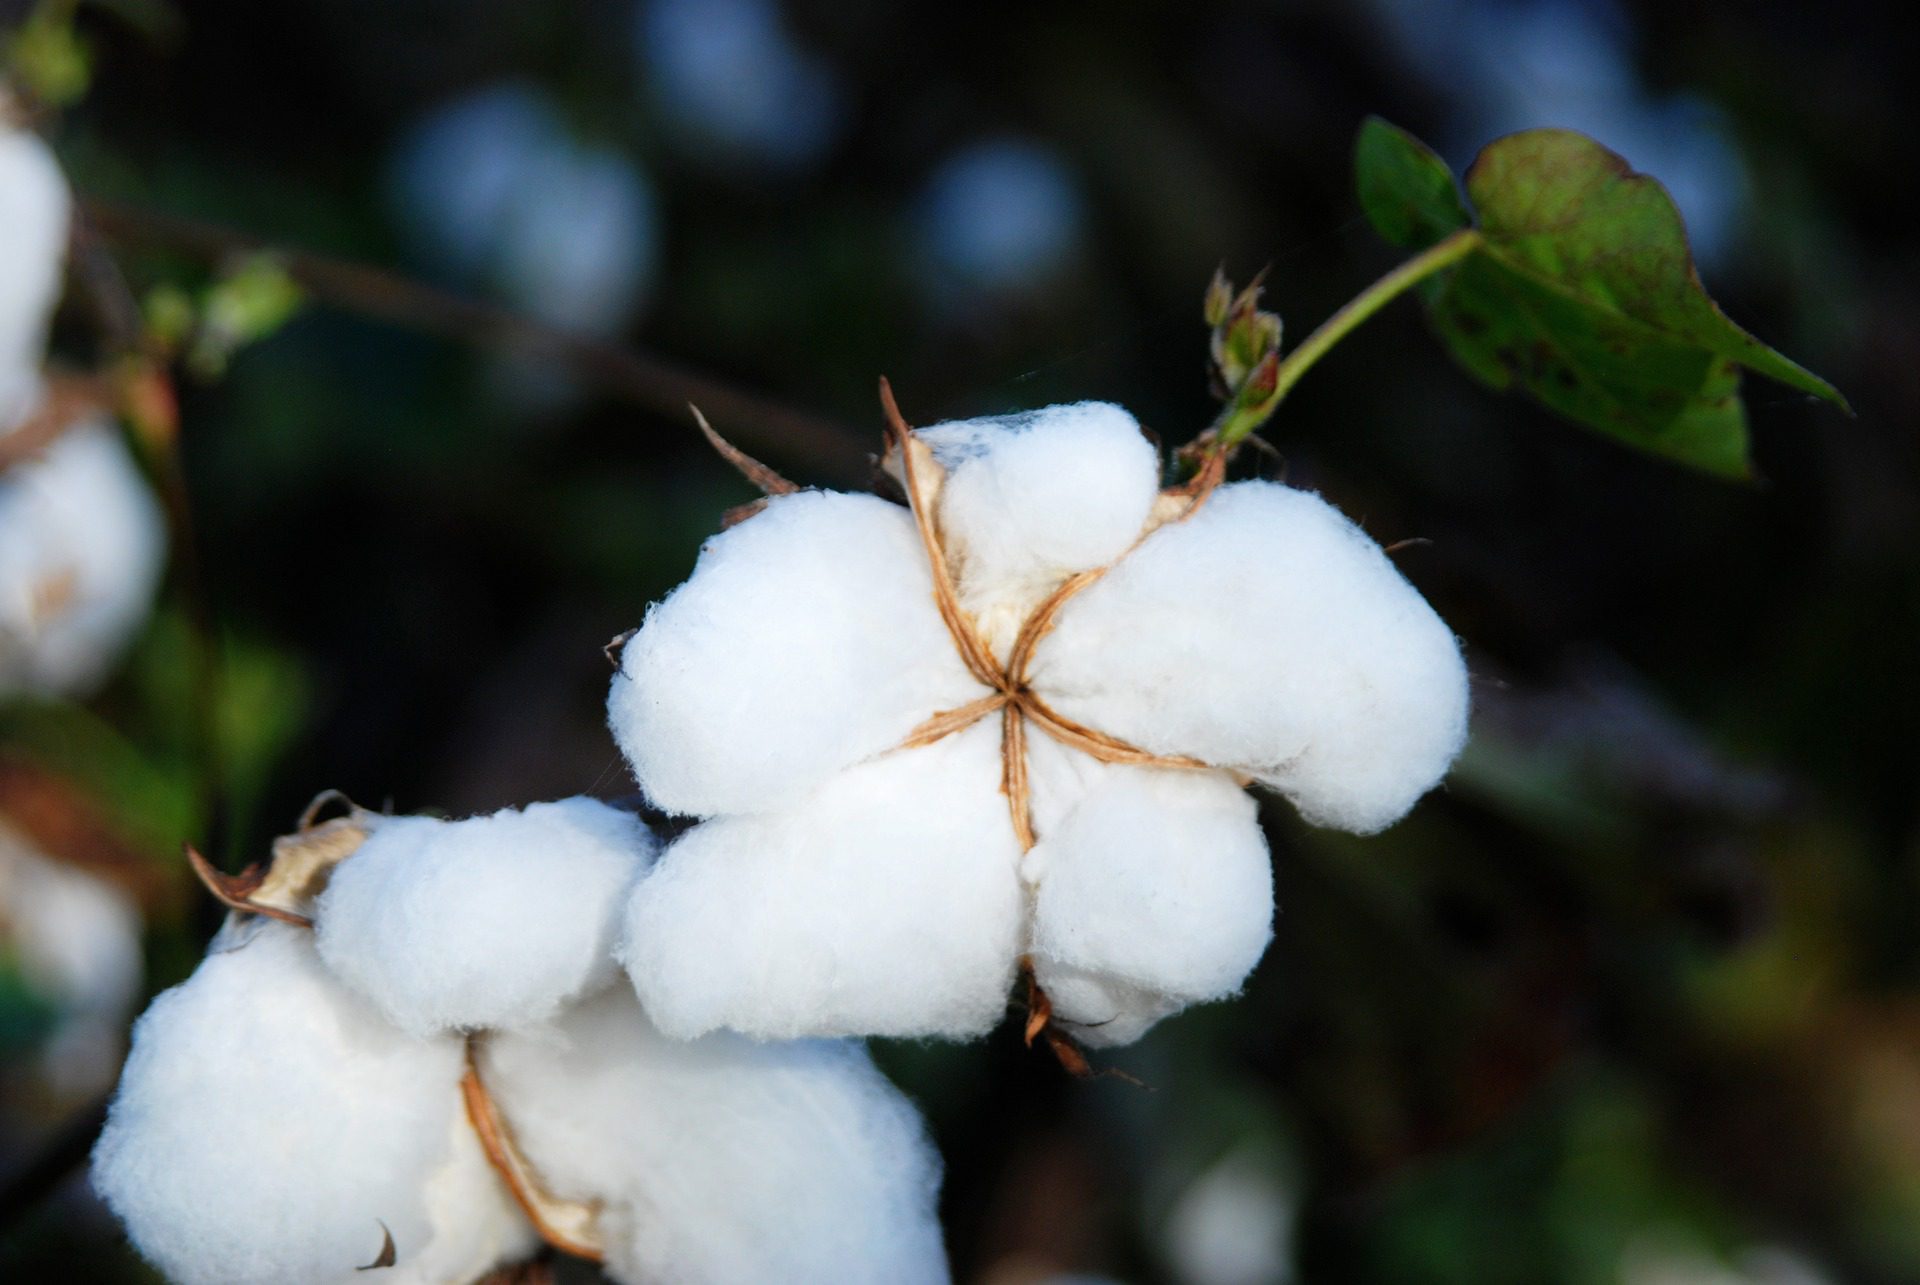 Laundering Cotton: How Xinjiang Cotton is Obscured in International Supply Chains